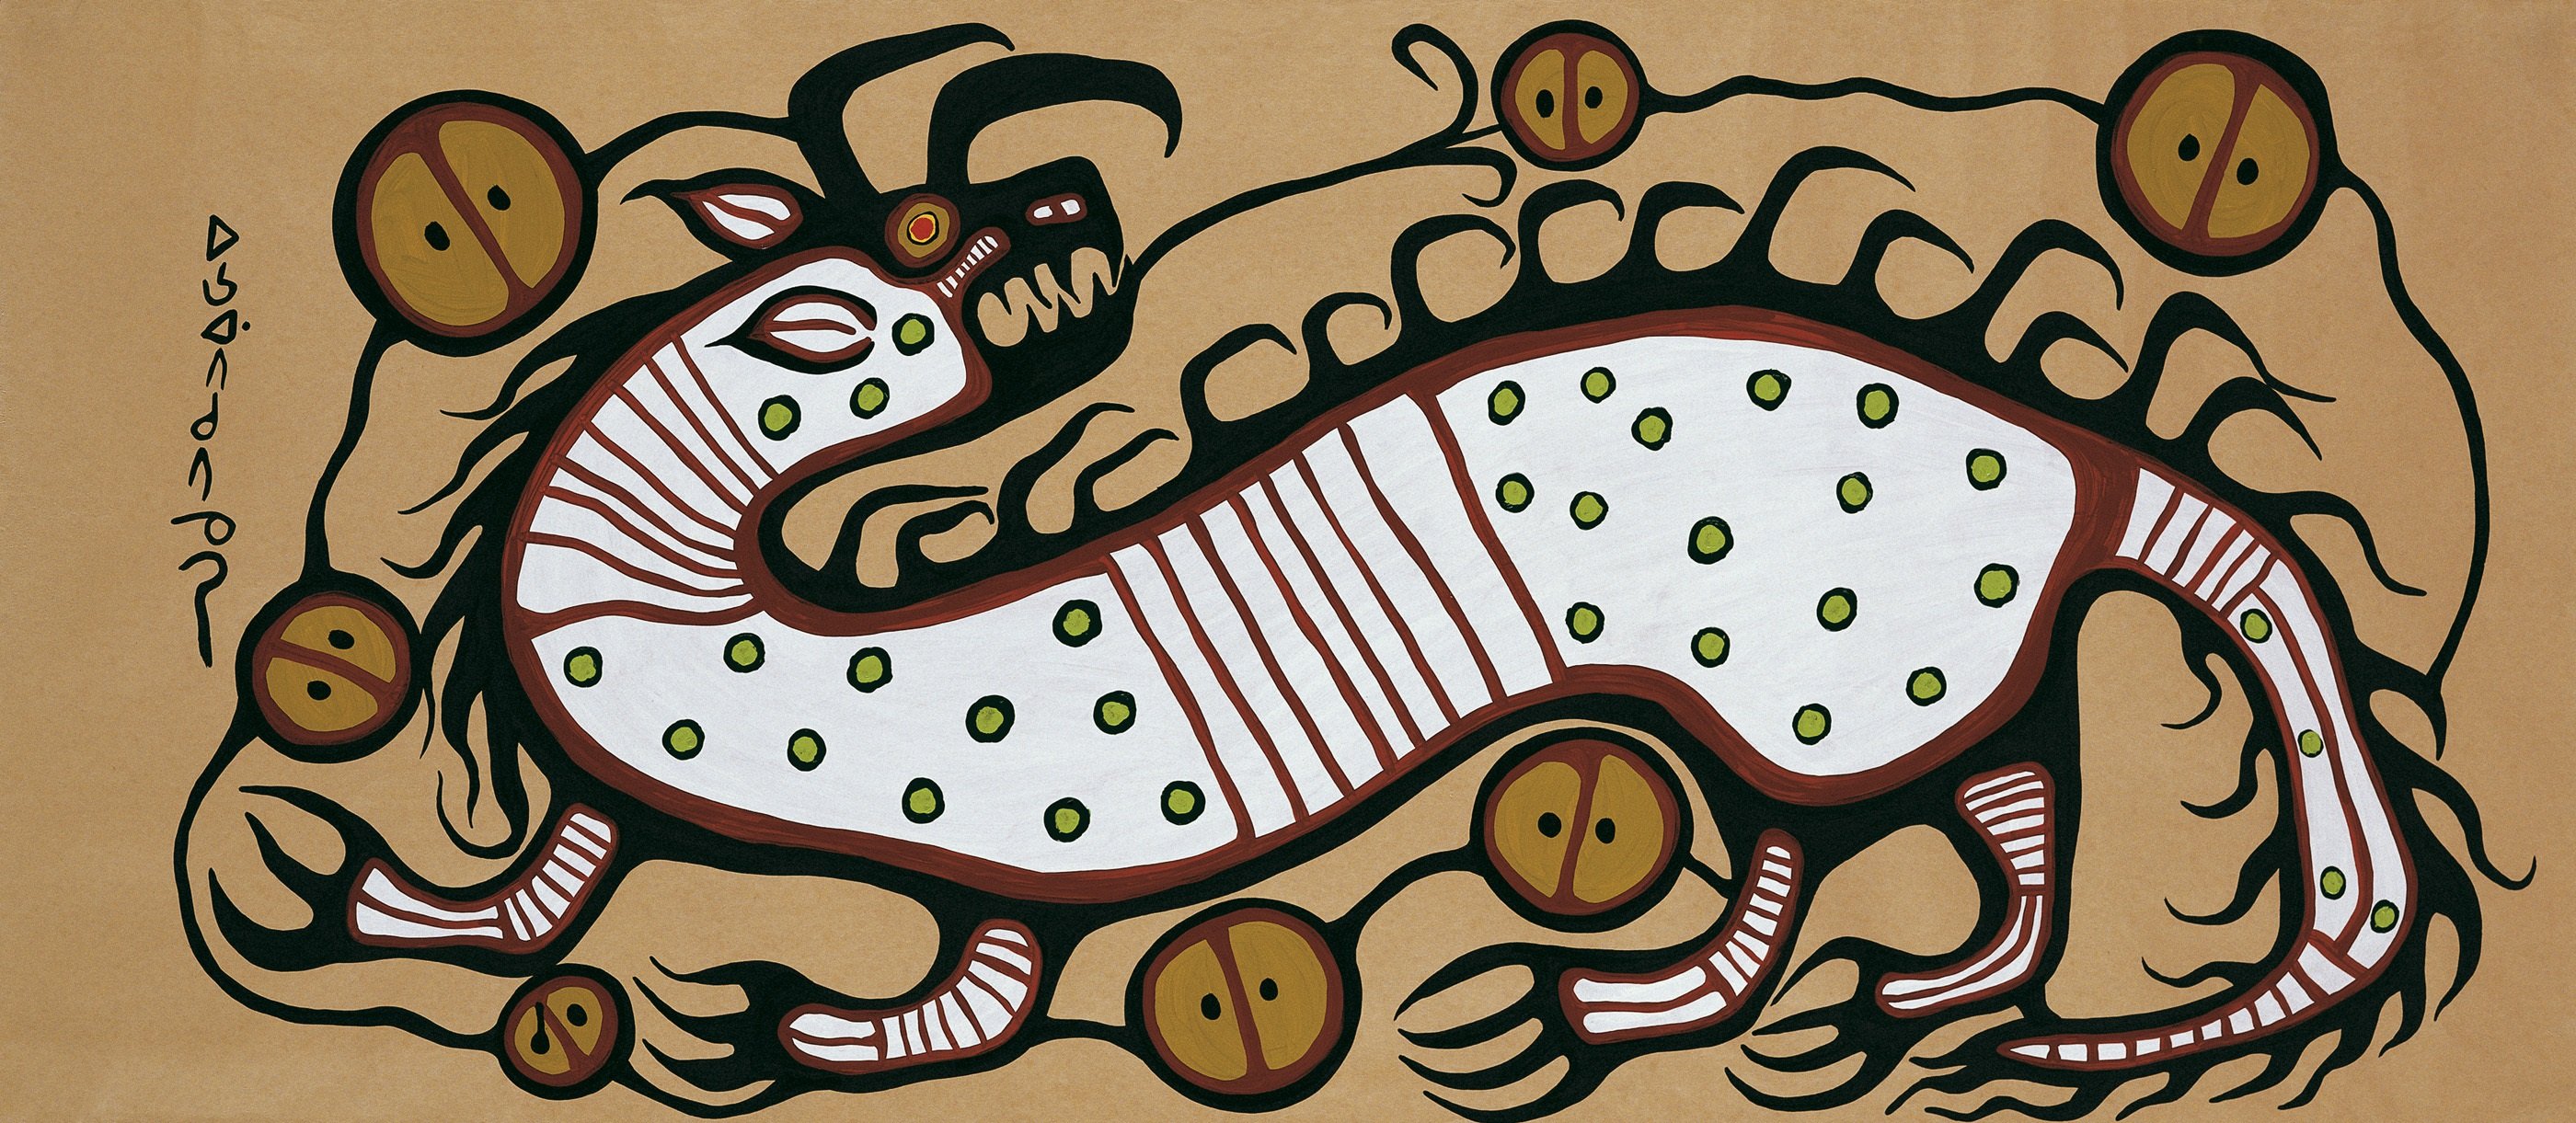 Artwork by Anishinabe painter Norval Morrisseau entitled Water Spirit representing a Mishipeshu